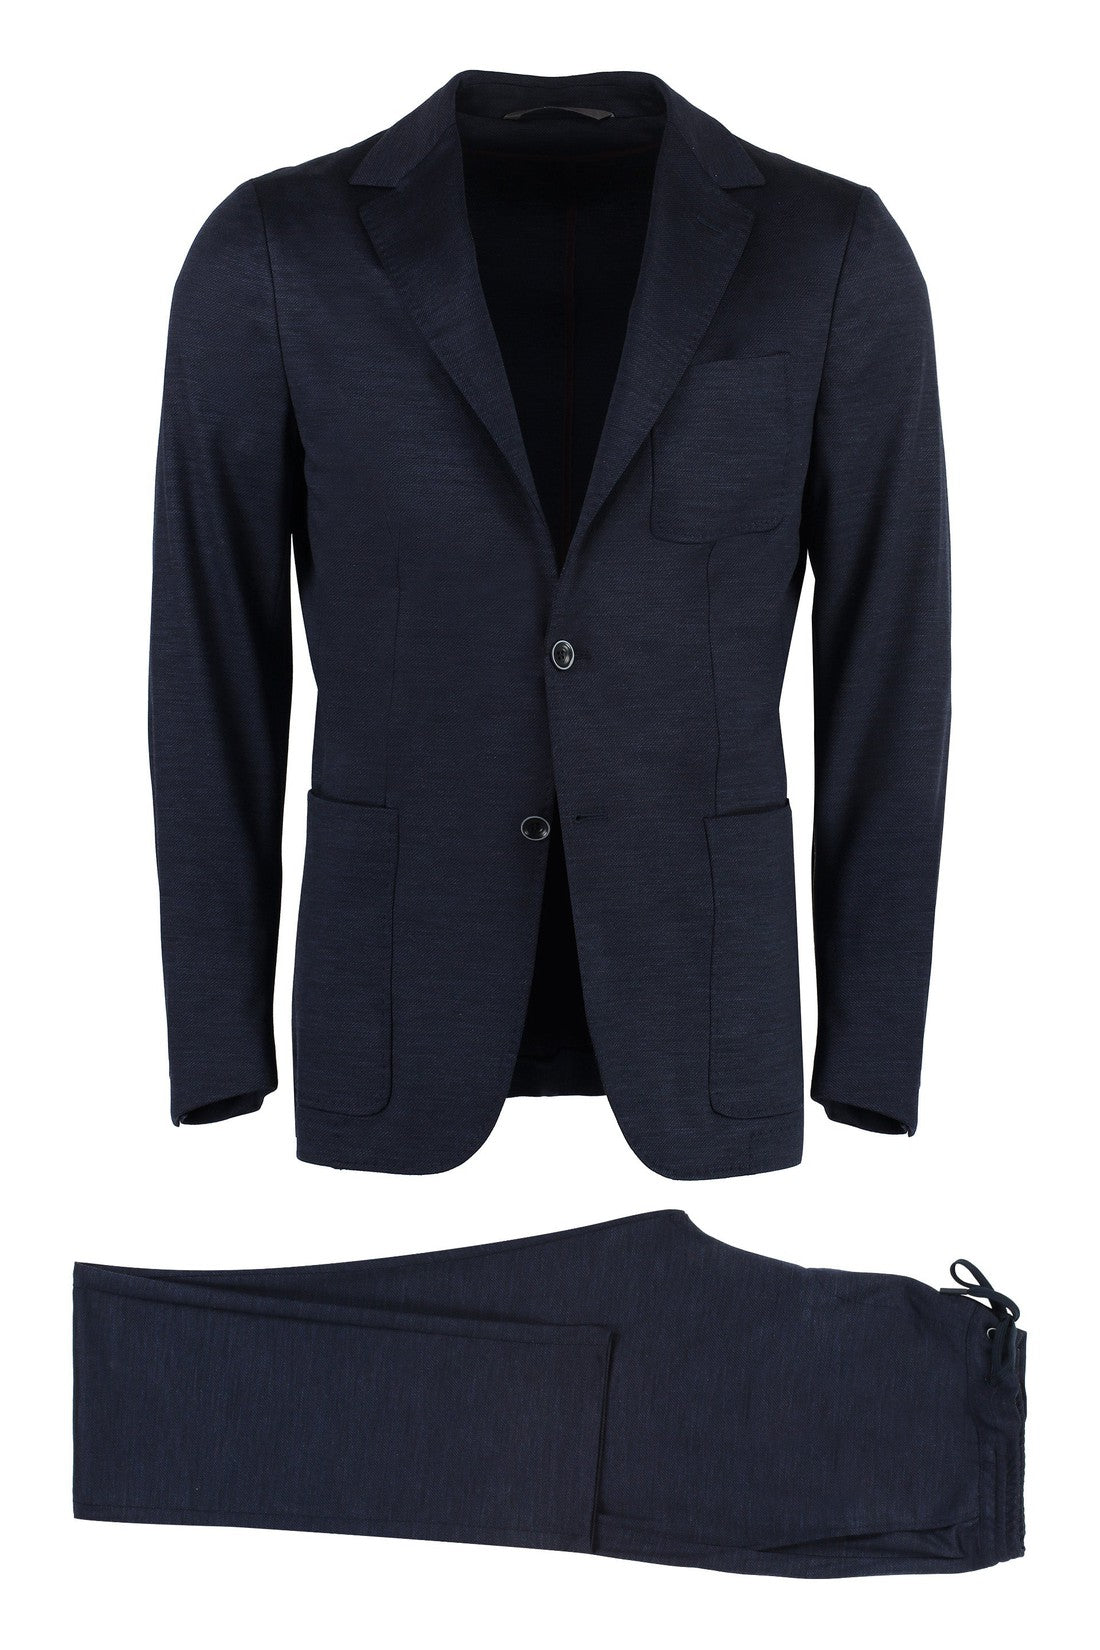 Canali-OUTLET-SALE-Two-piece suit in wool-ARCHIVIST